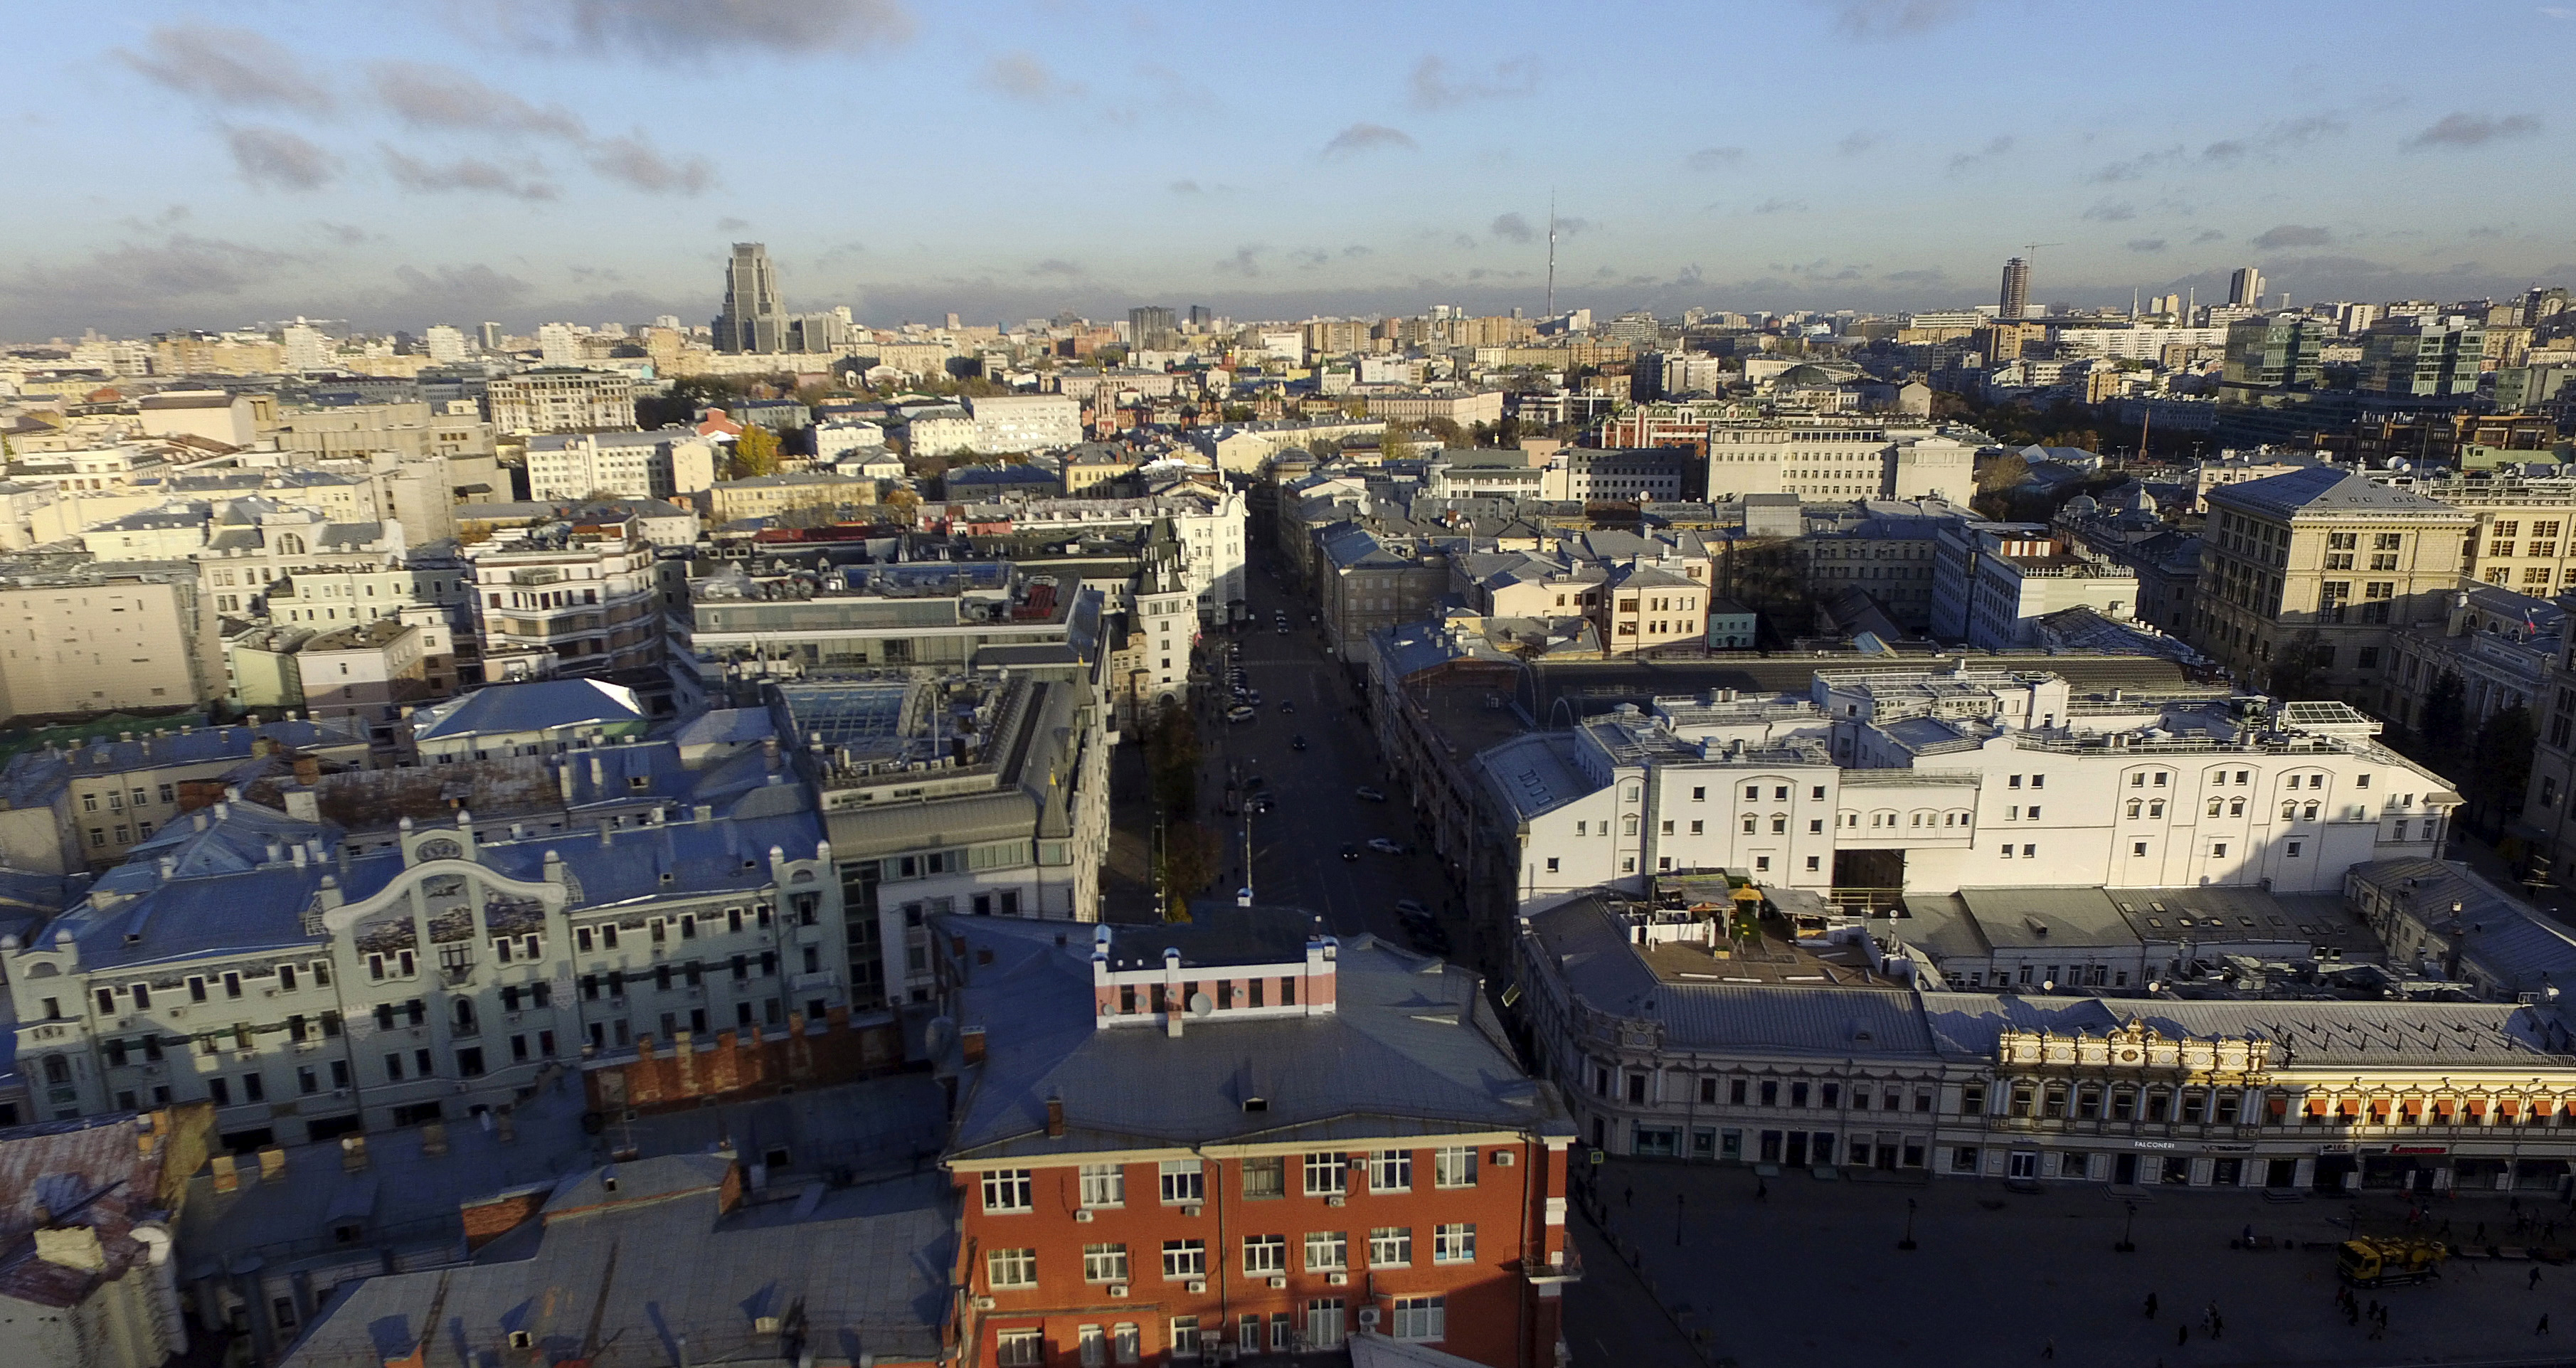 An aerial view shows the skyline of the capital Moscow in Russia